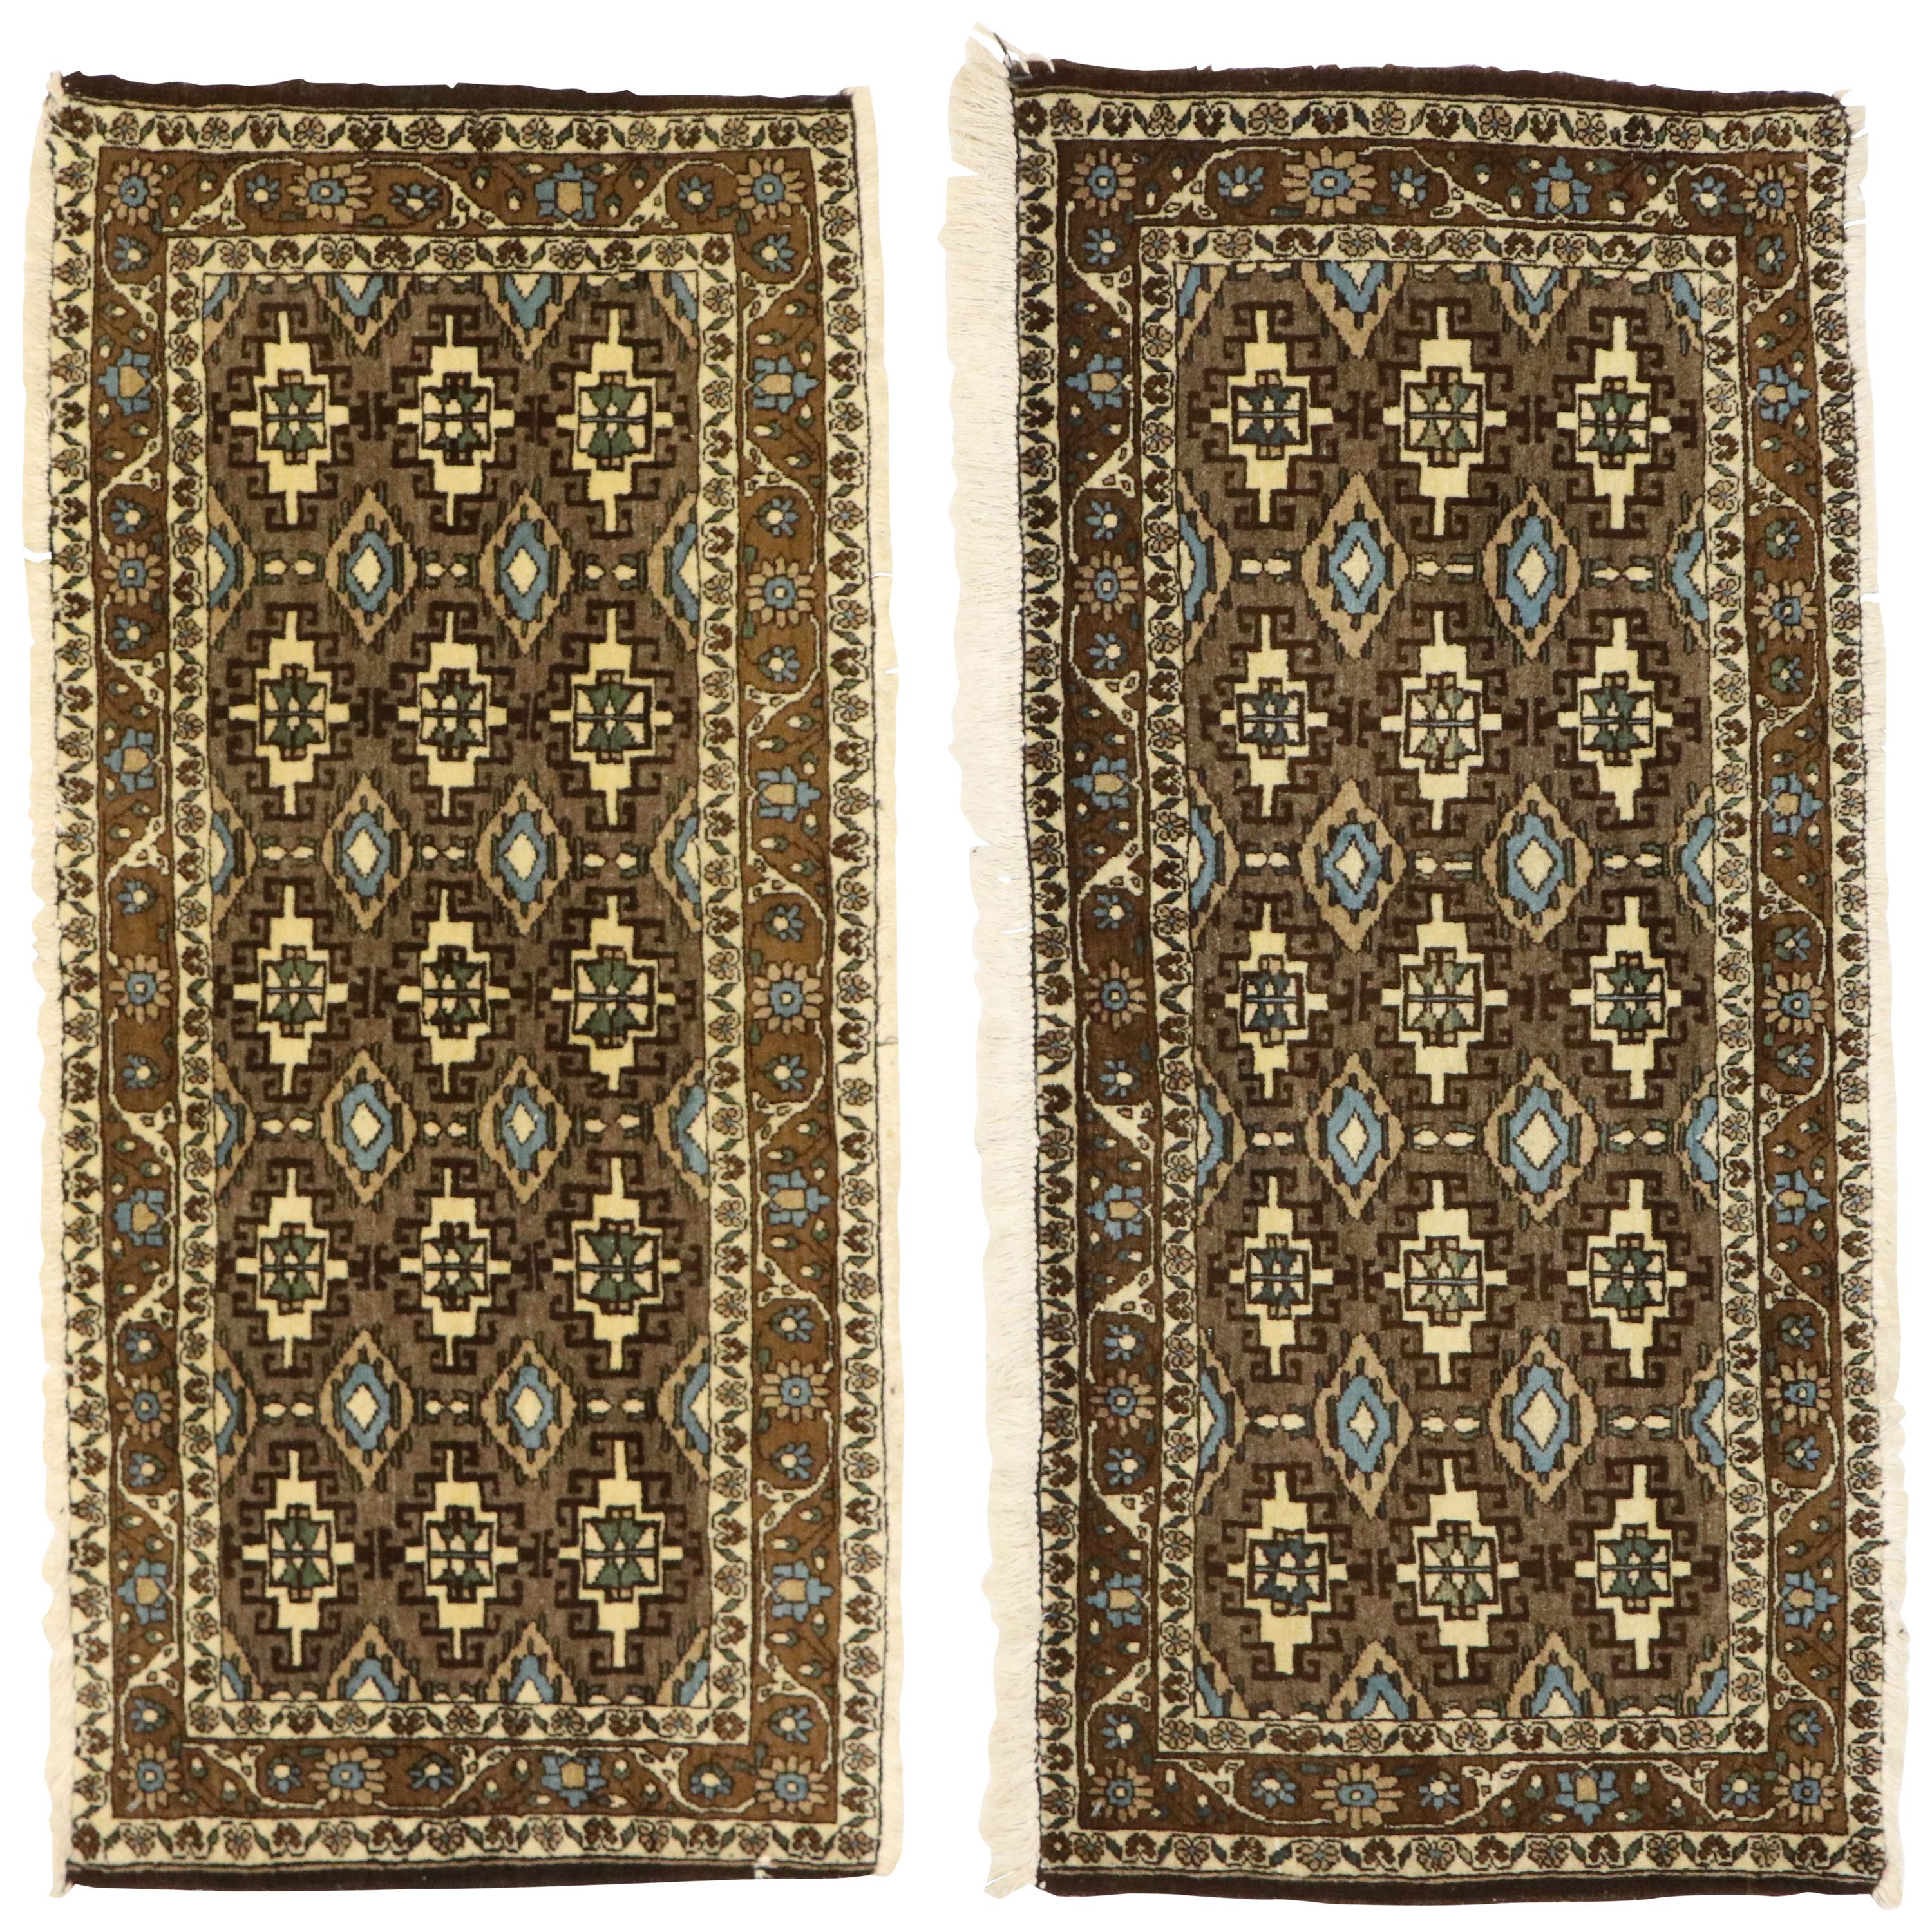 Pair of Matching Vintage Persian Mashhad Rugs with Mid-Century Modern Style For Sale